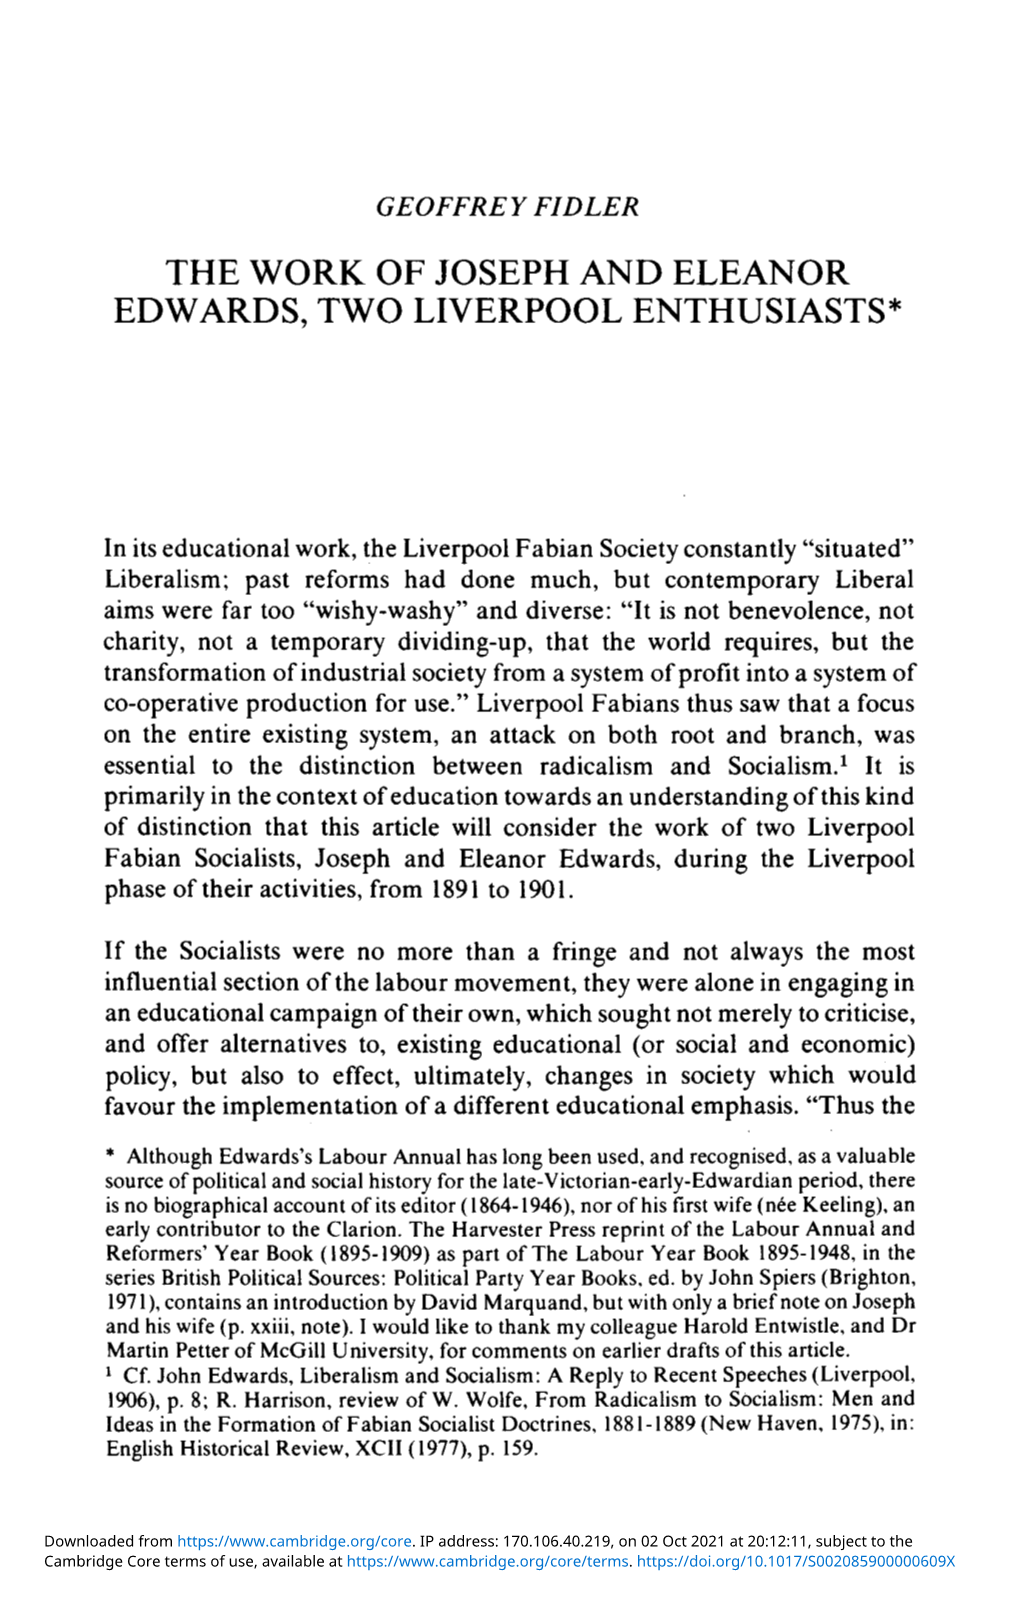 The Work of Joseph and Eleanor Edwards, Two Liverpool Enthusiasts*